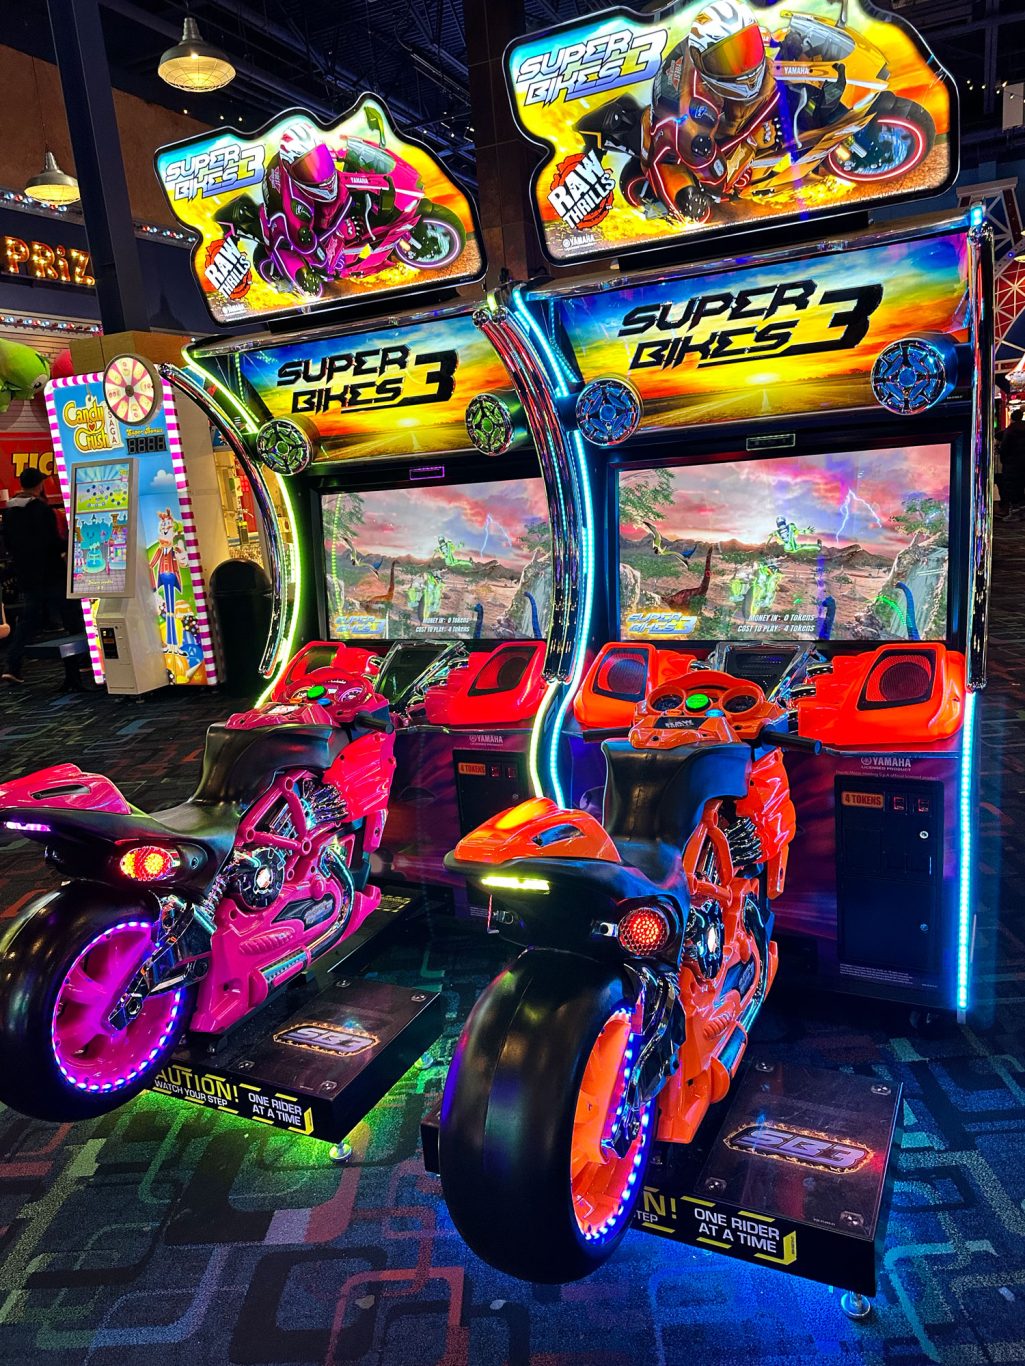 Super Bikes 3 Game inside the Great Canadian Midway